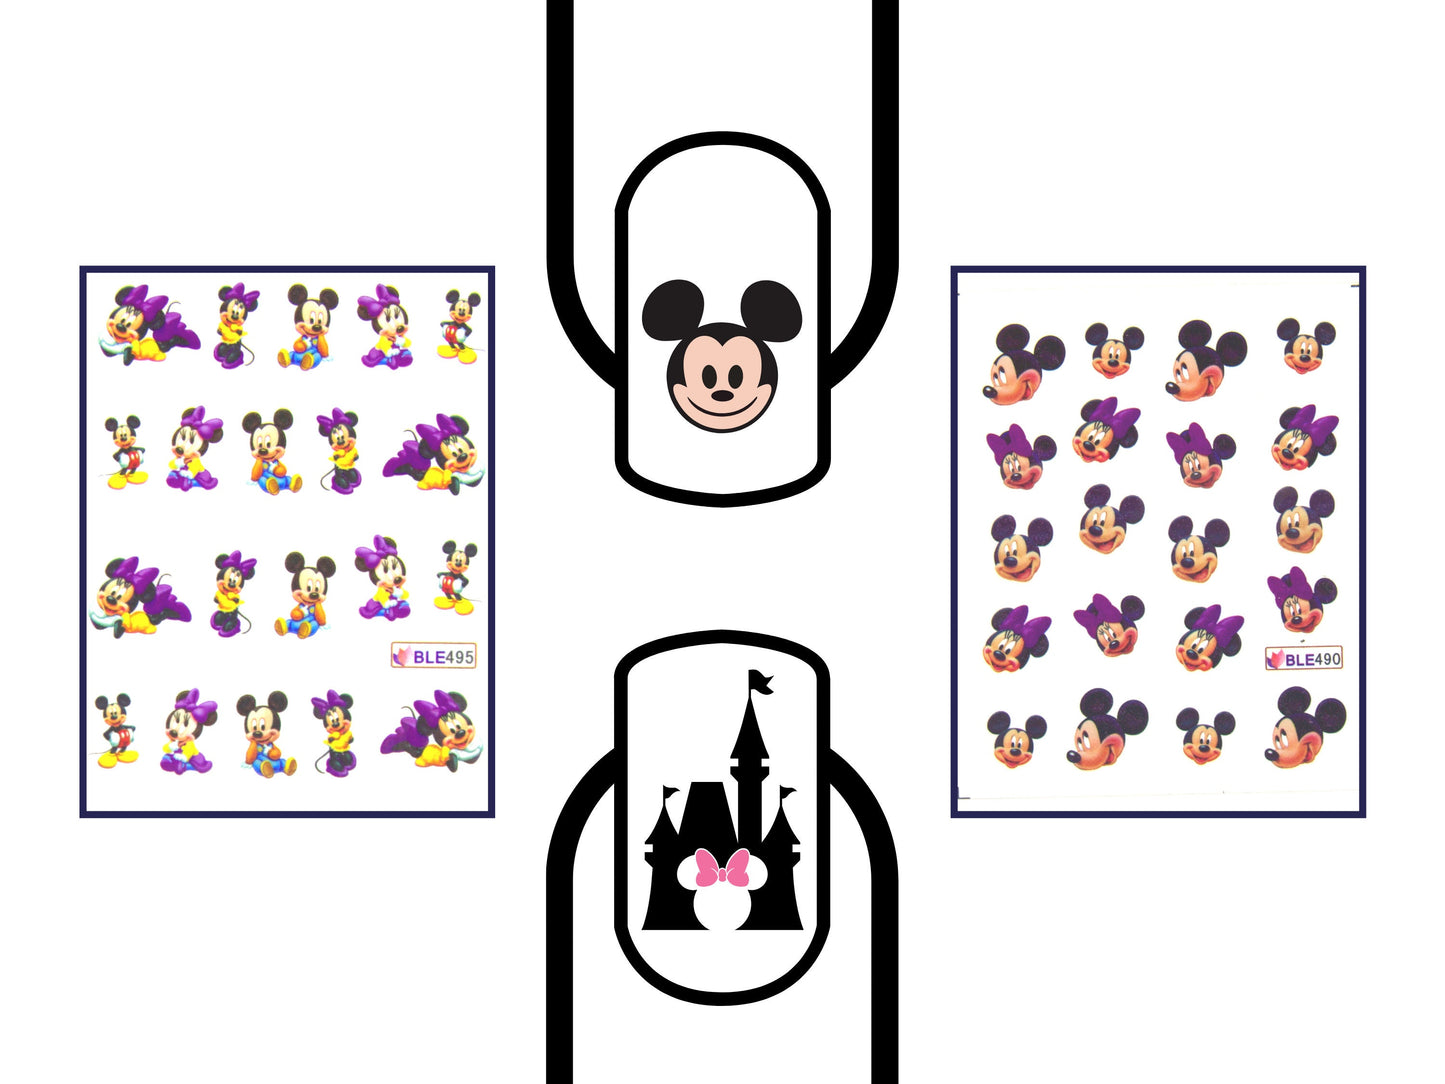 2pcs Mickey Mouse Minnie Mouse Nail Decals/Disney Theme nail sticker/Water Transfer Nail Art Stickers Decals/ Cartoon Miniature Appliques